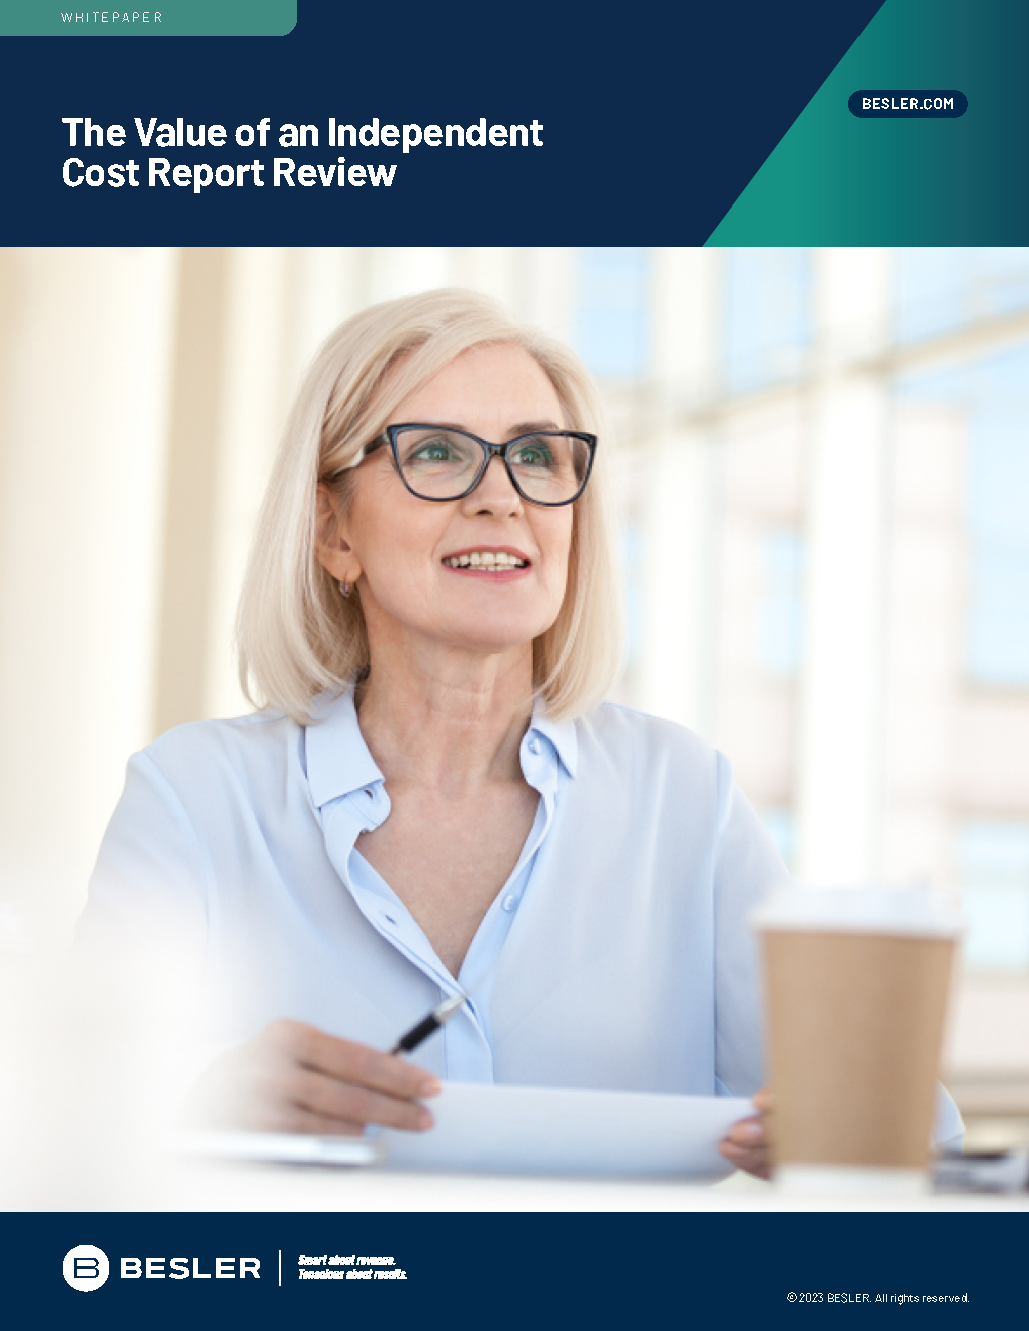 The Value of an Independent Cost Report Review White Paper